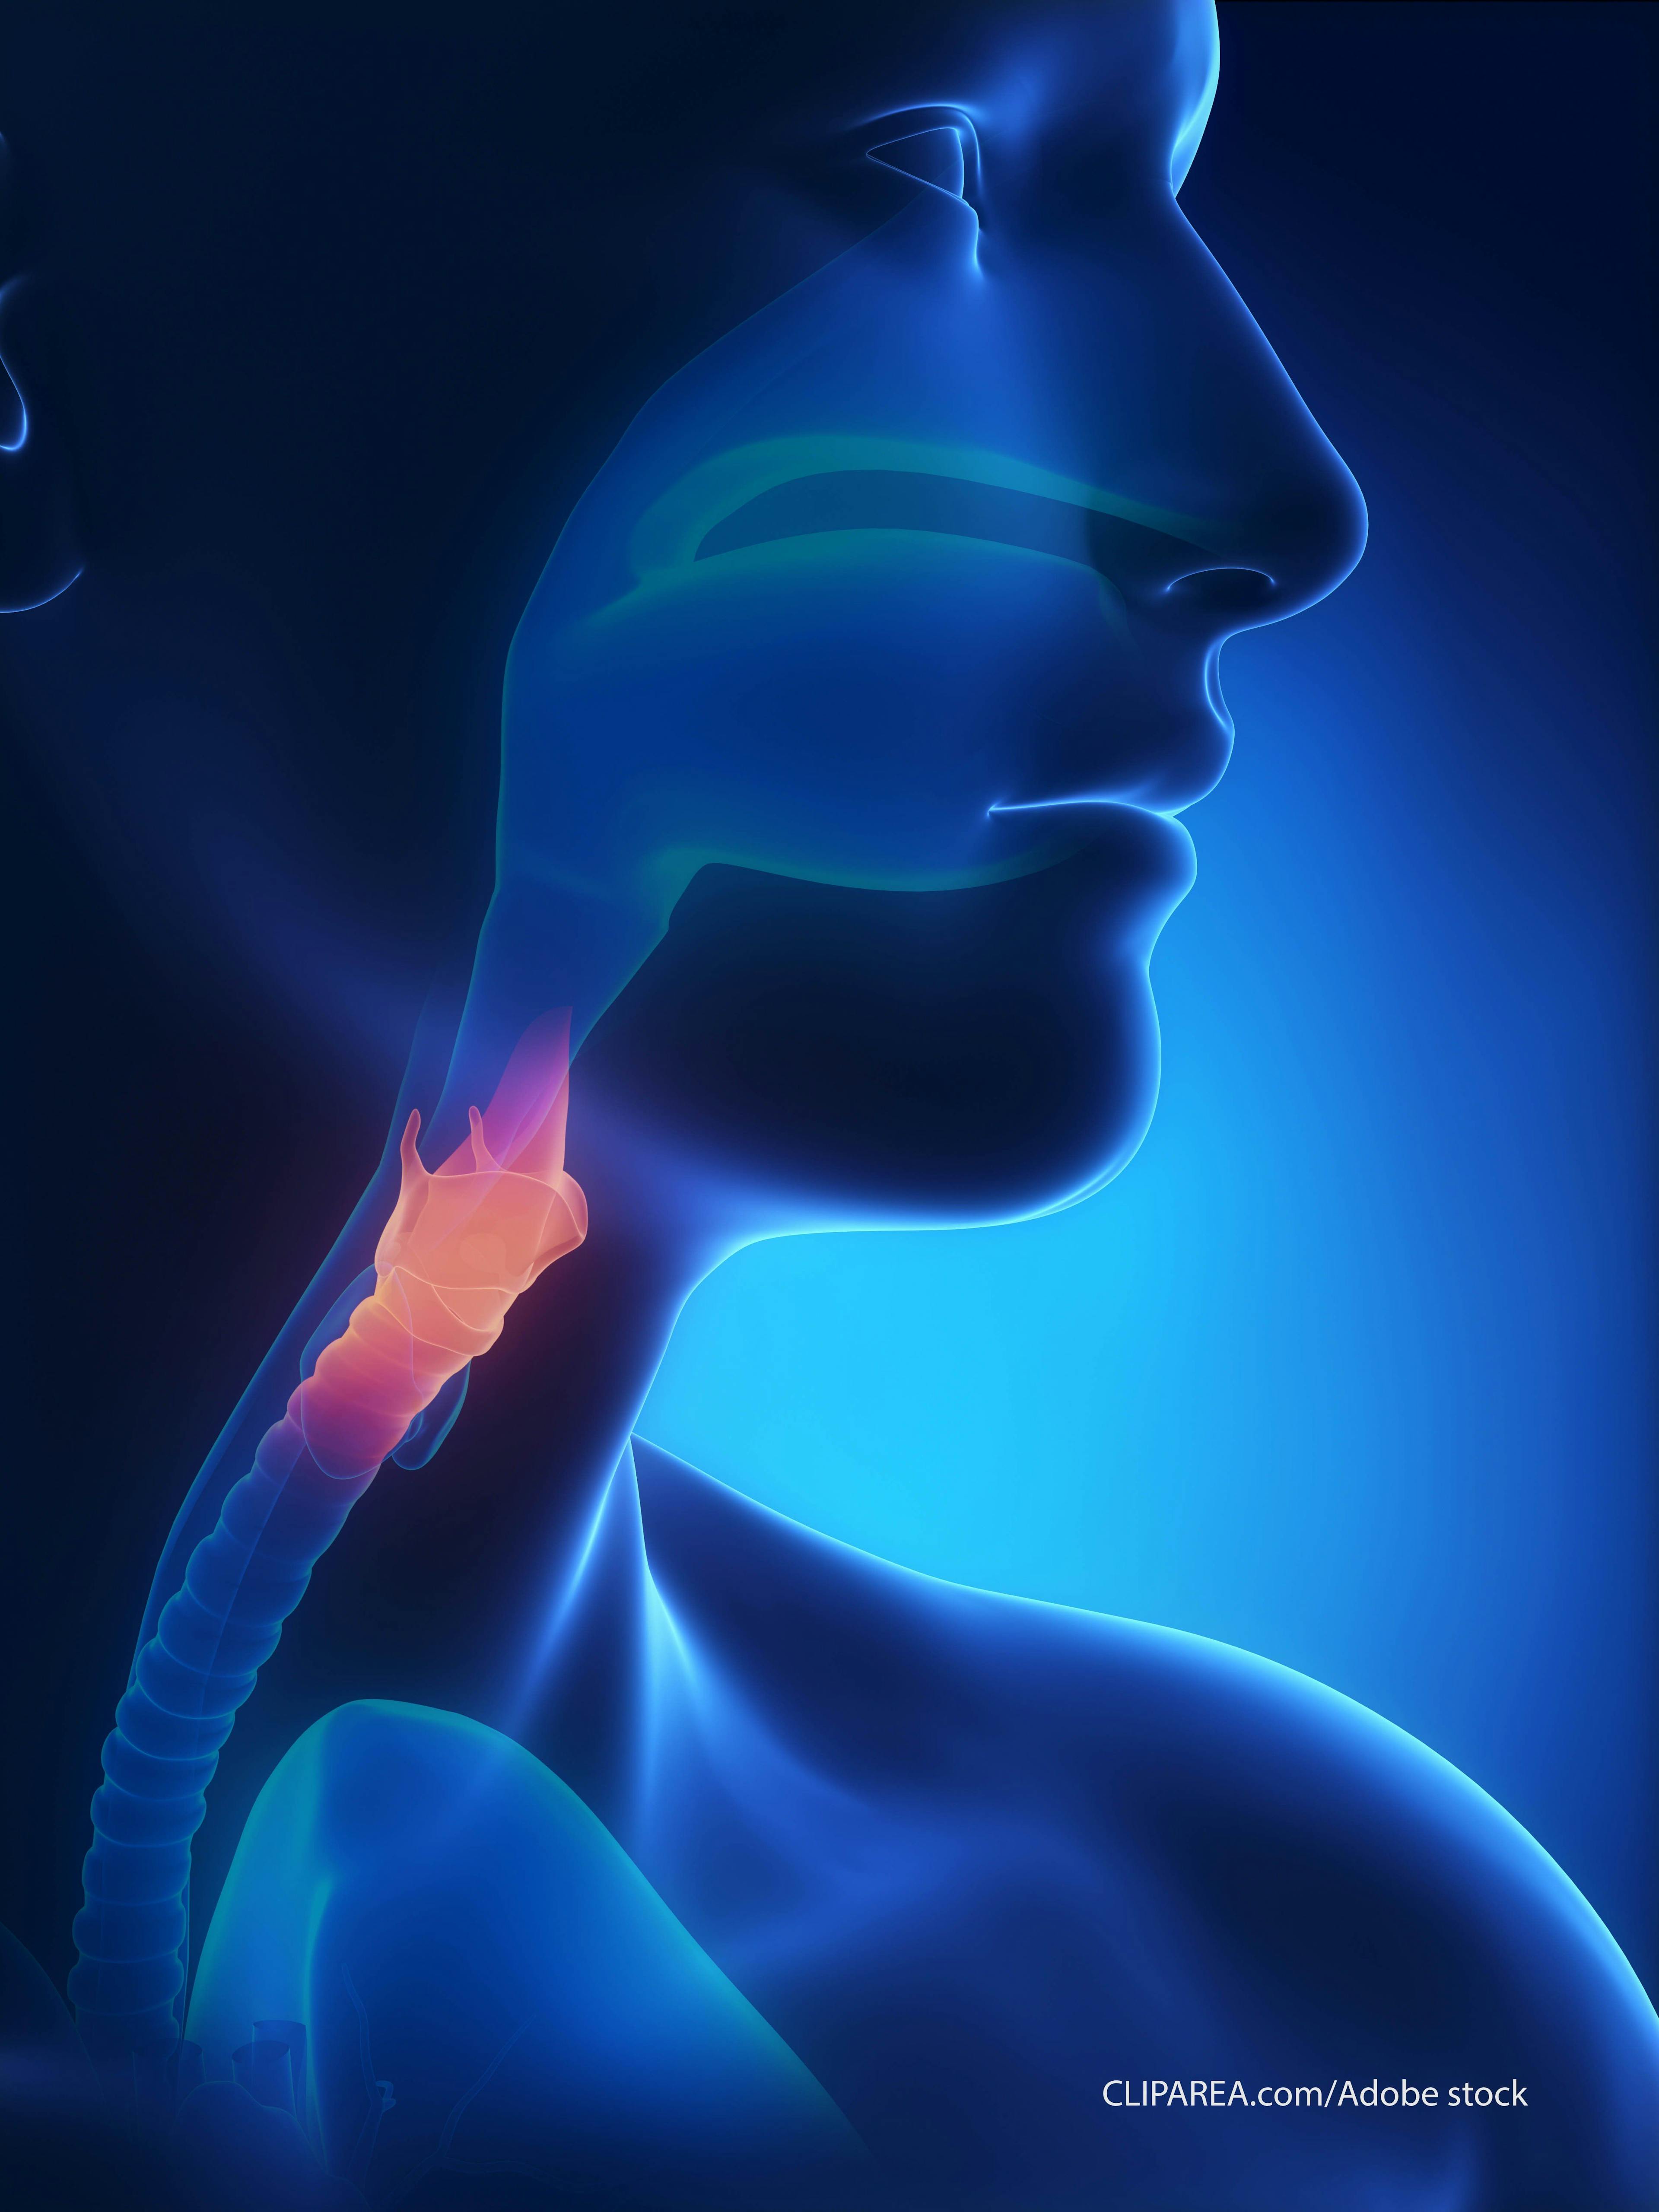 Questions Remain About the Role of Transoral Surgery for Oropharyngeal Cancer